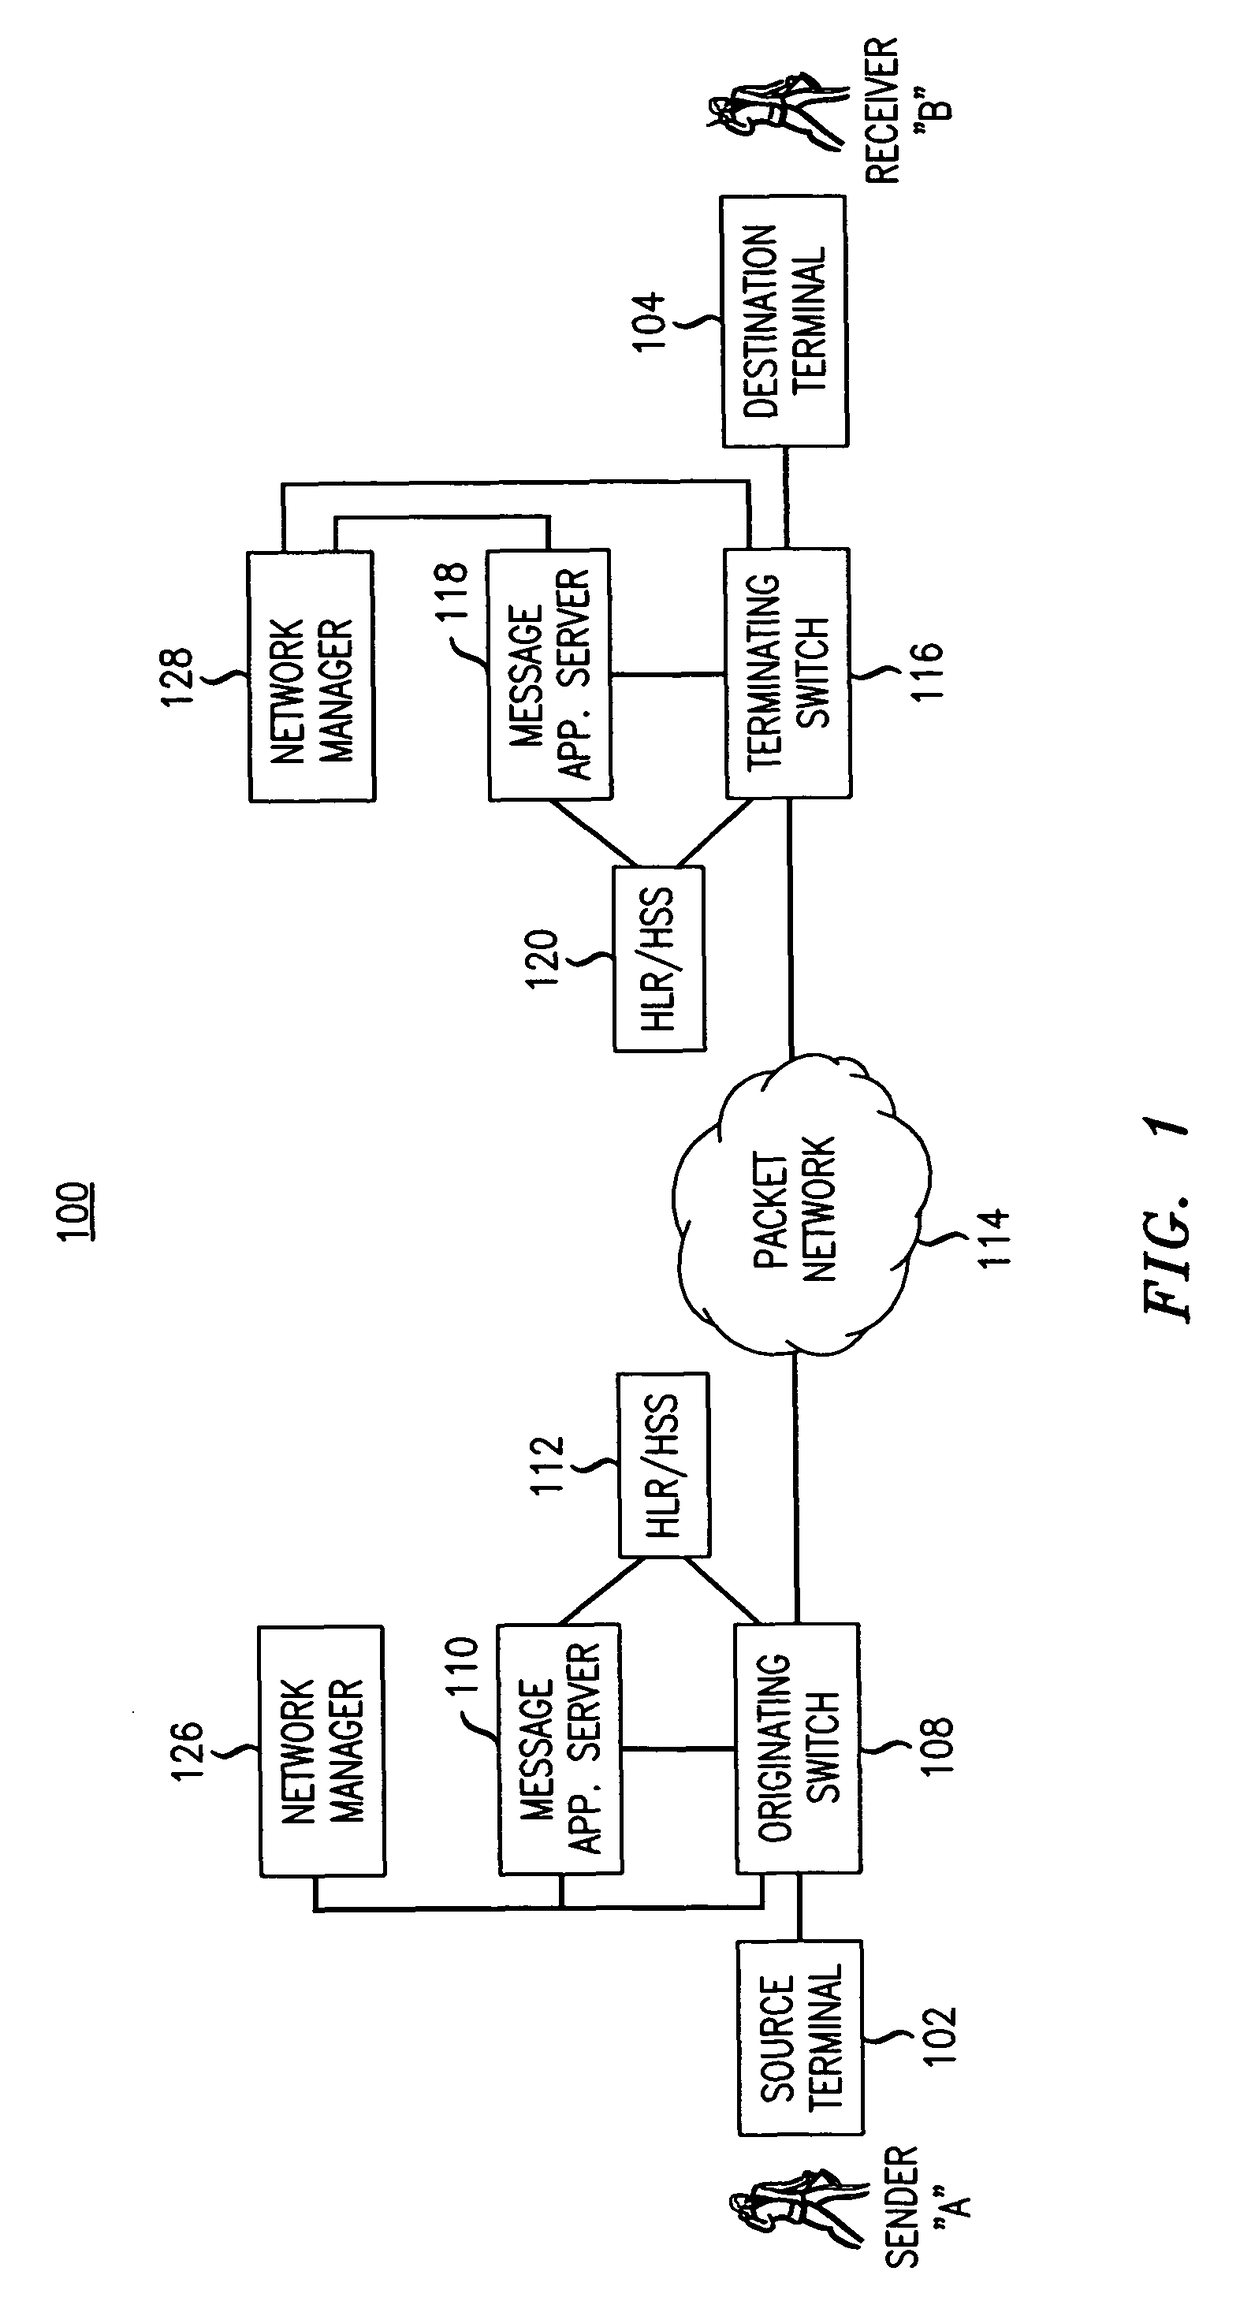 Message spoofing detection via validation of originating switch